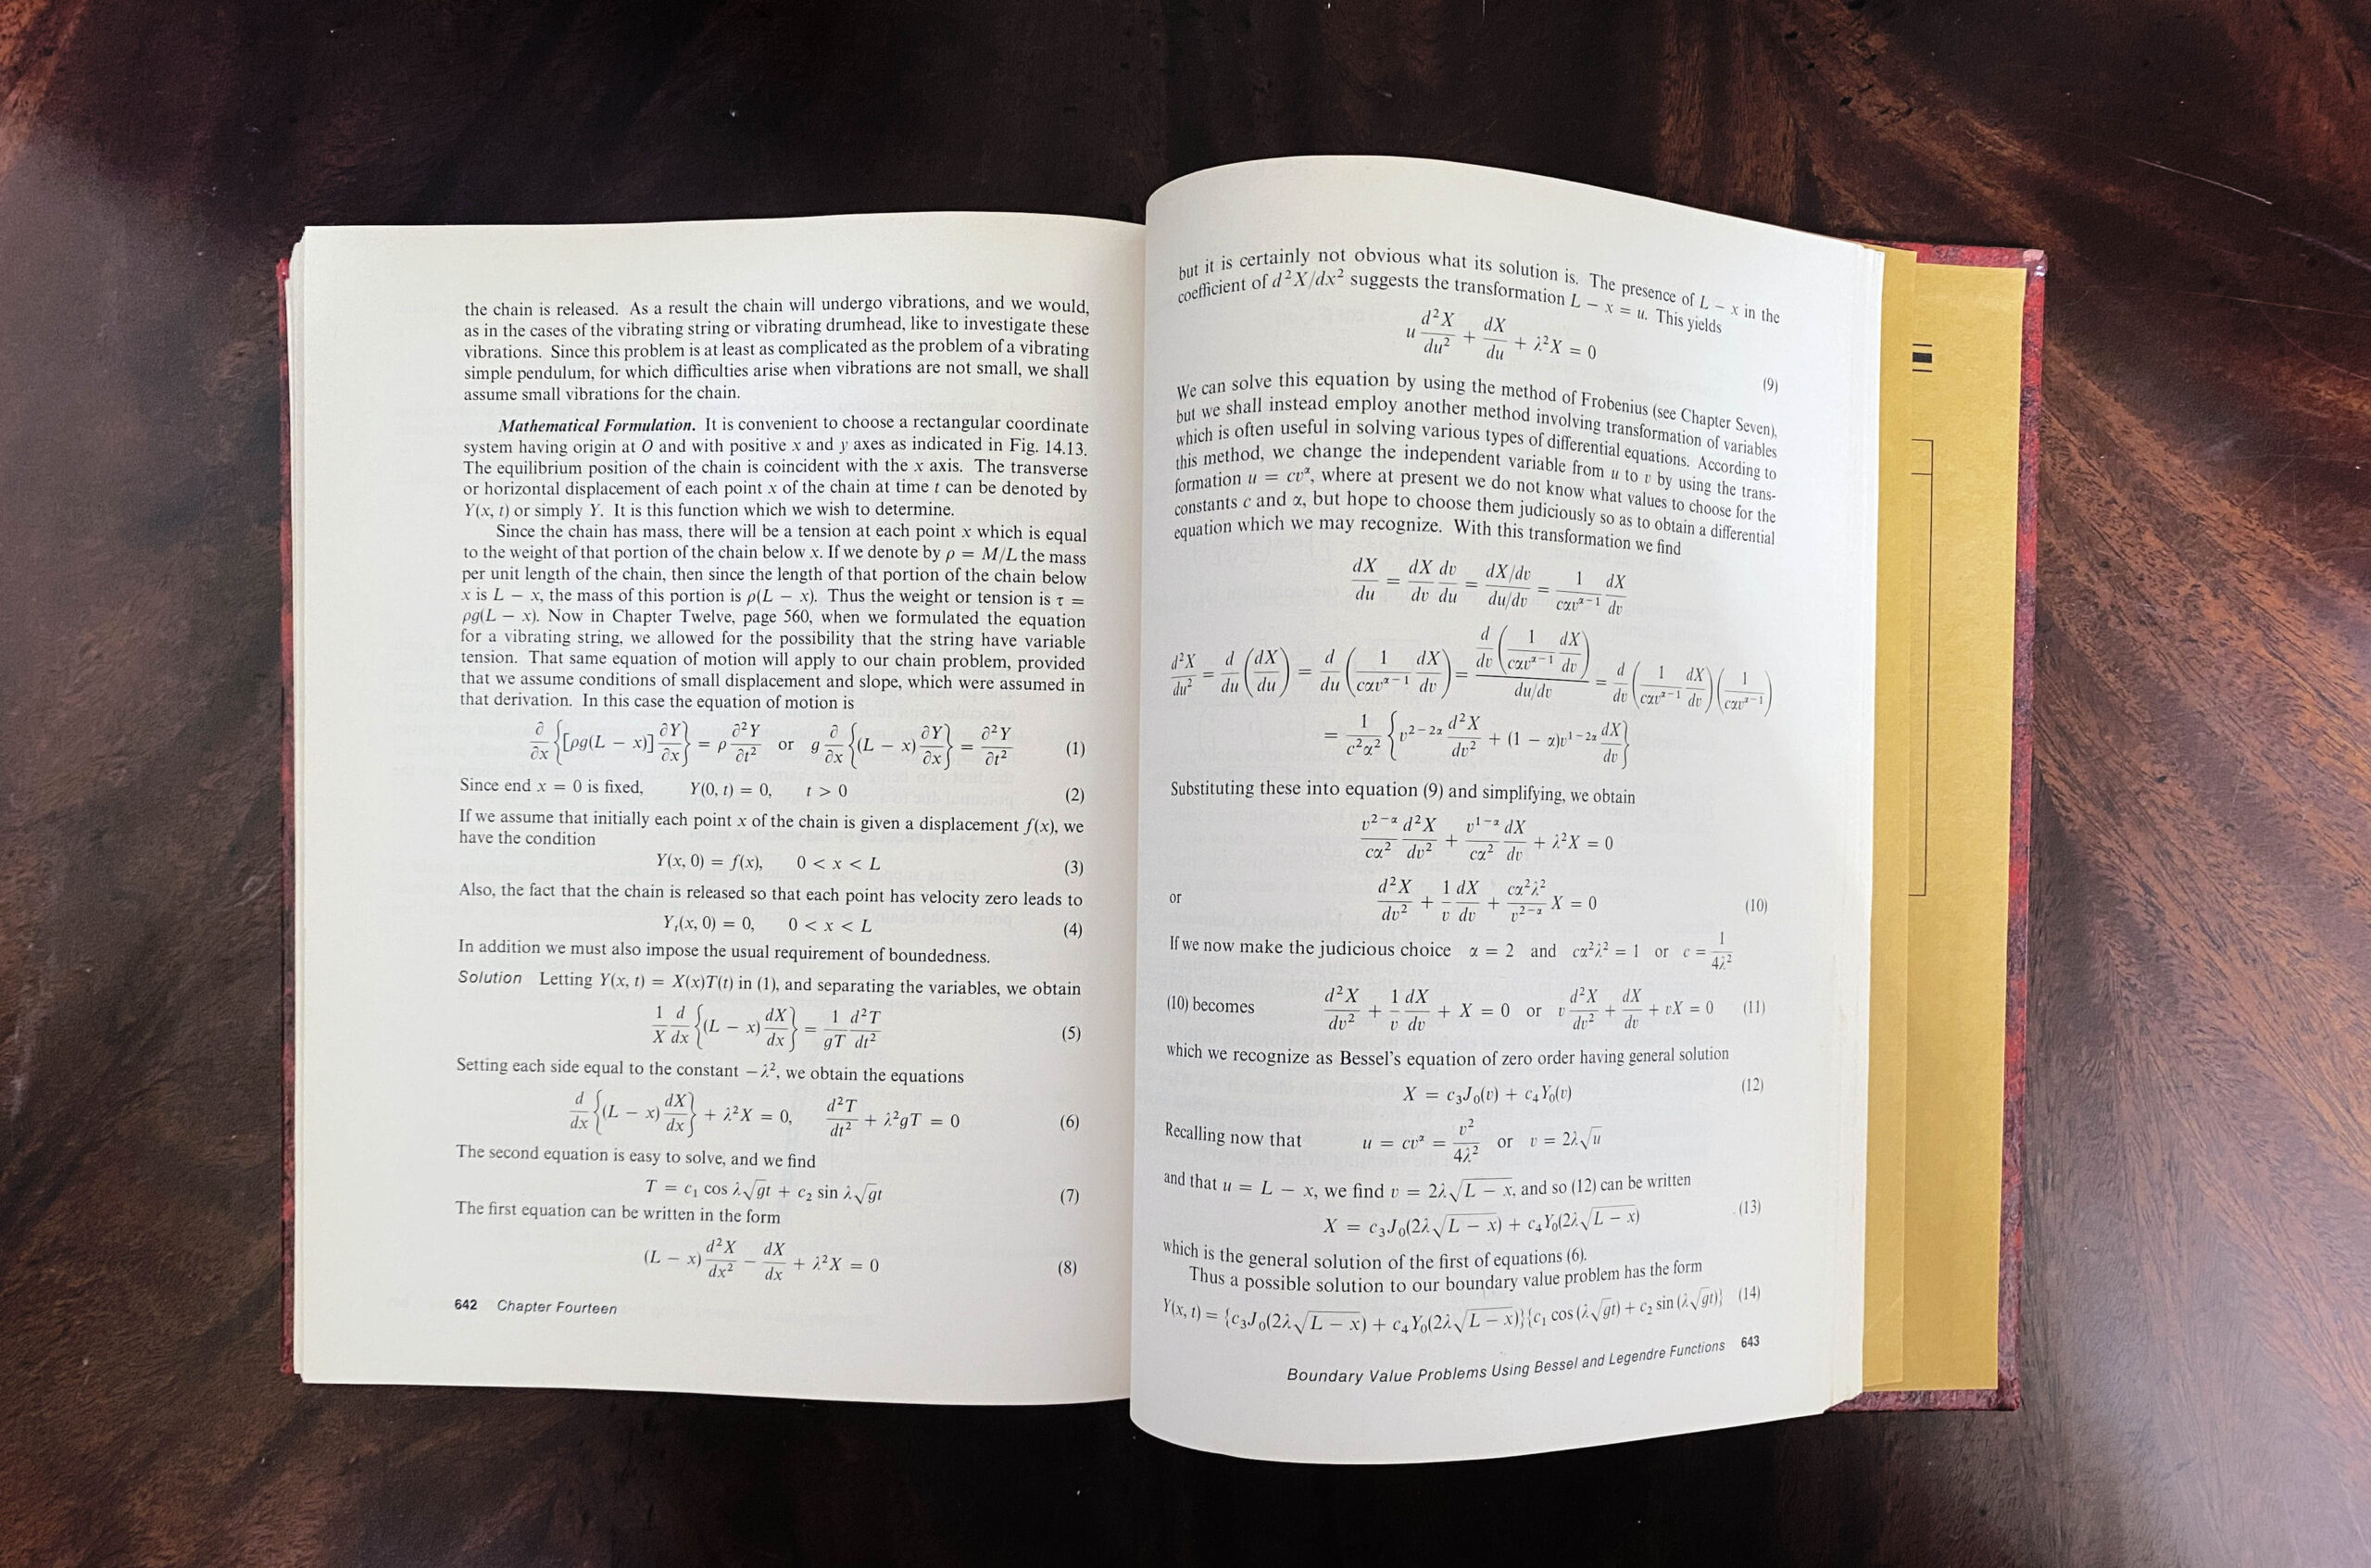 a mathematical textbook open, showing the two pages